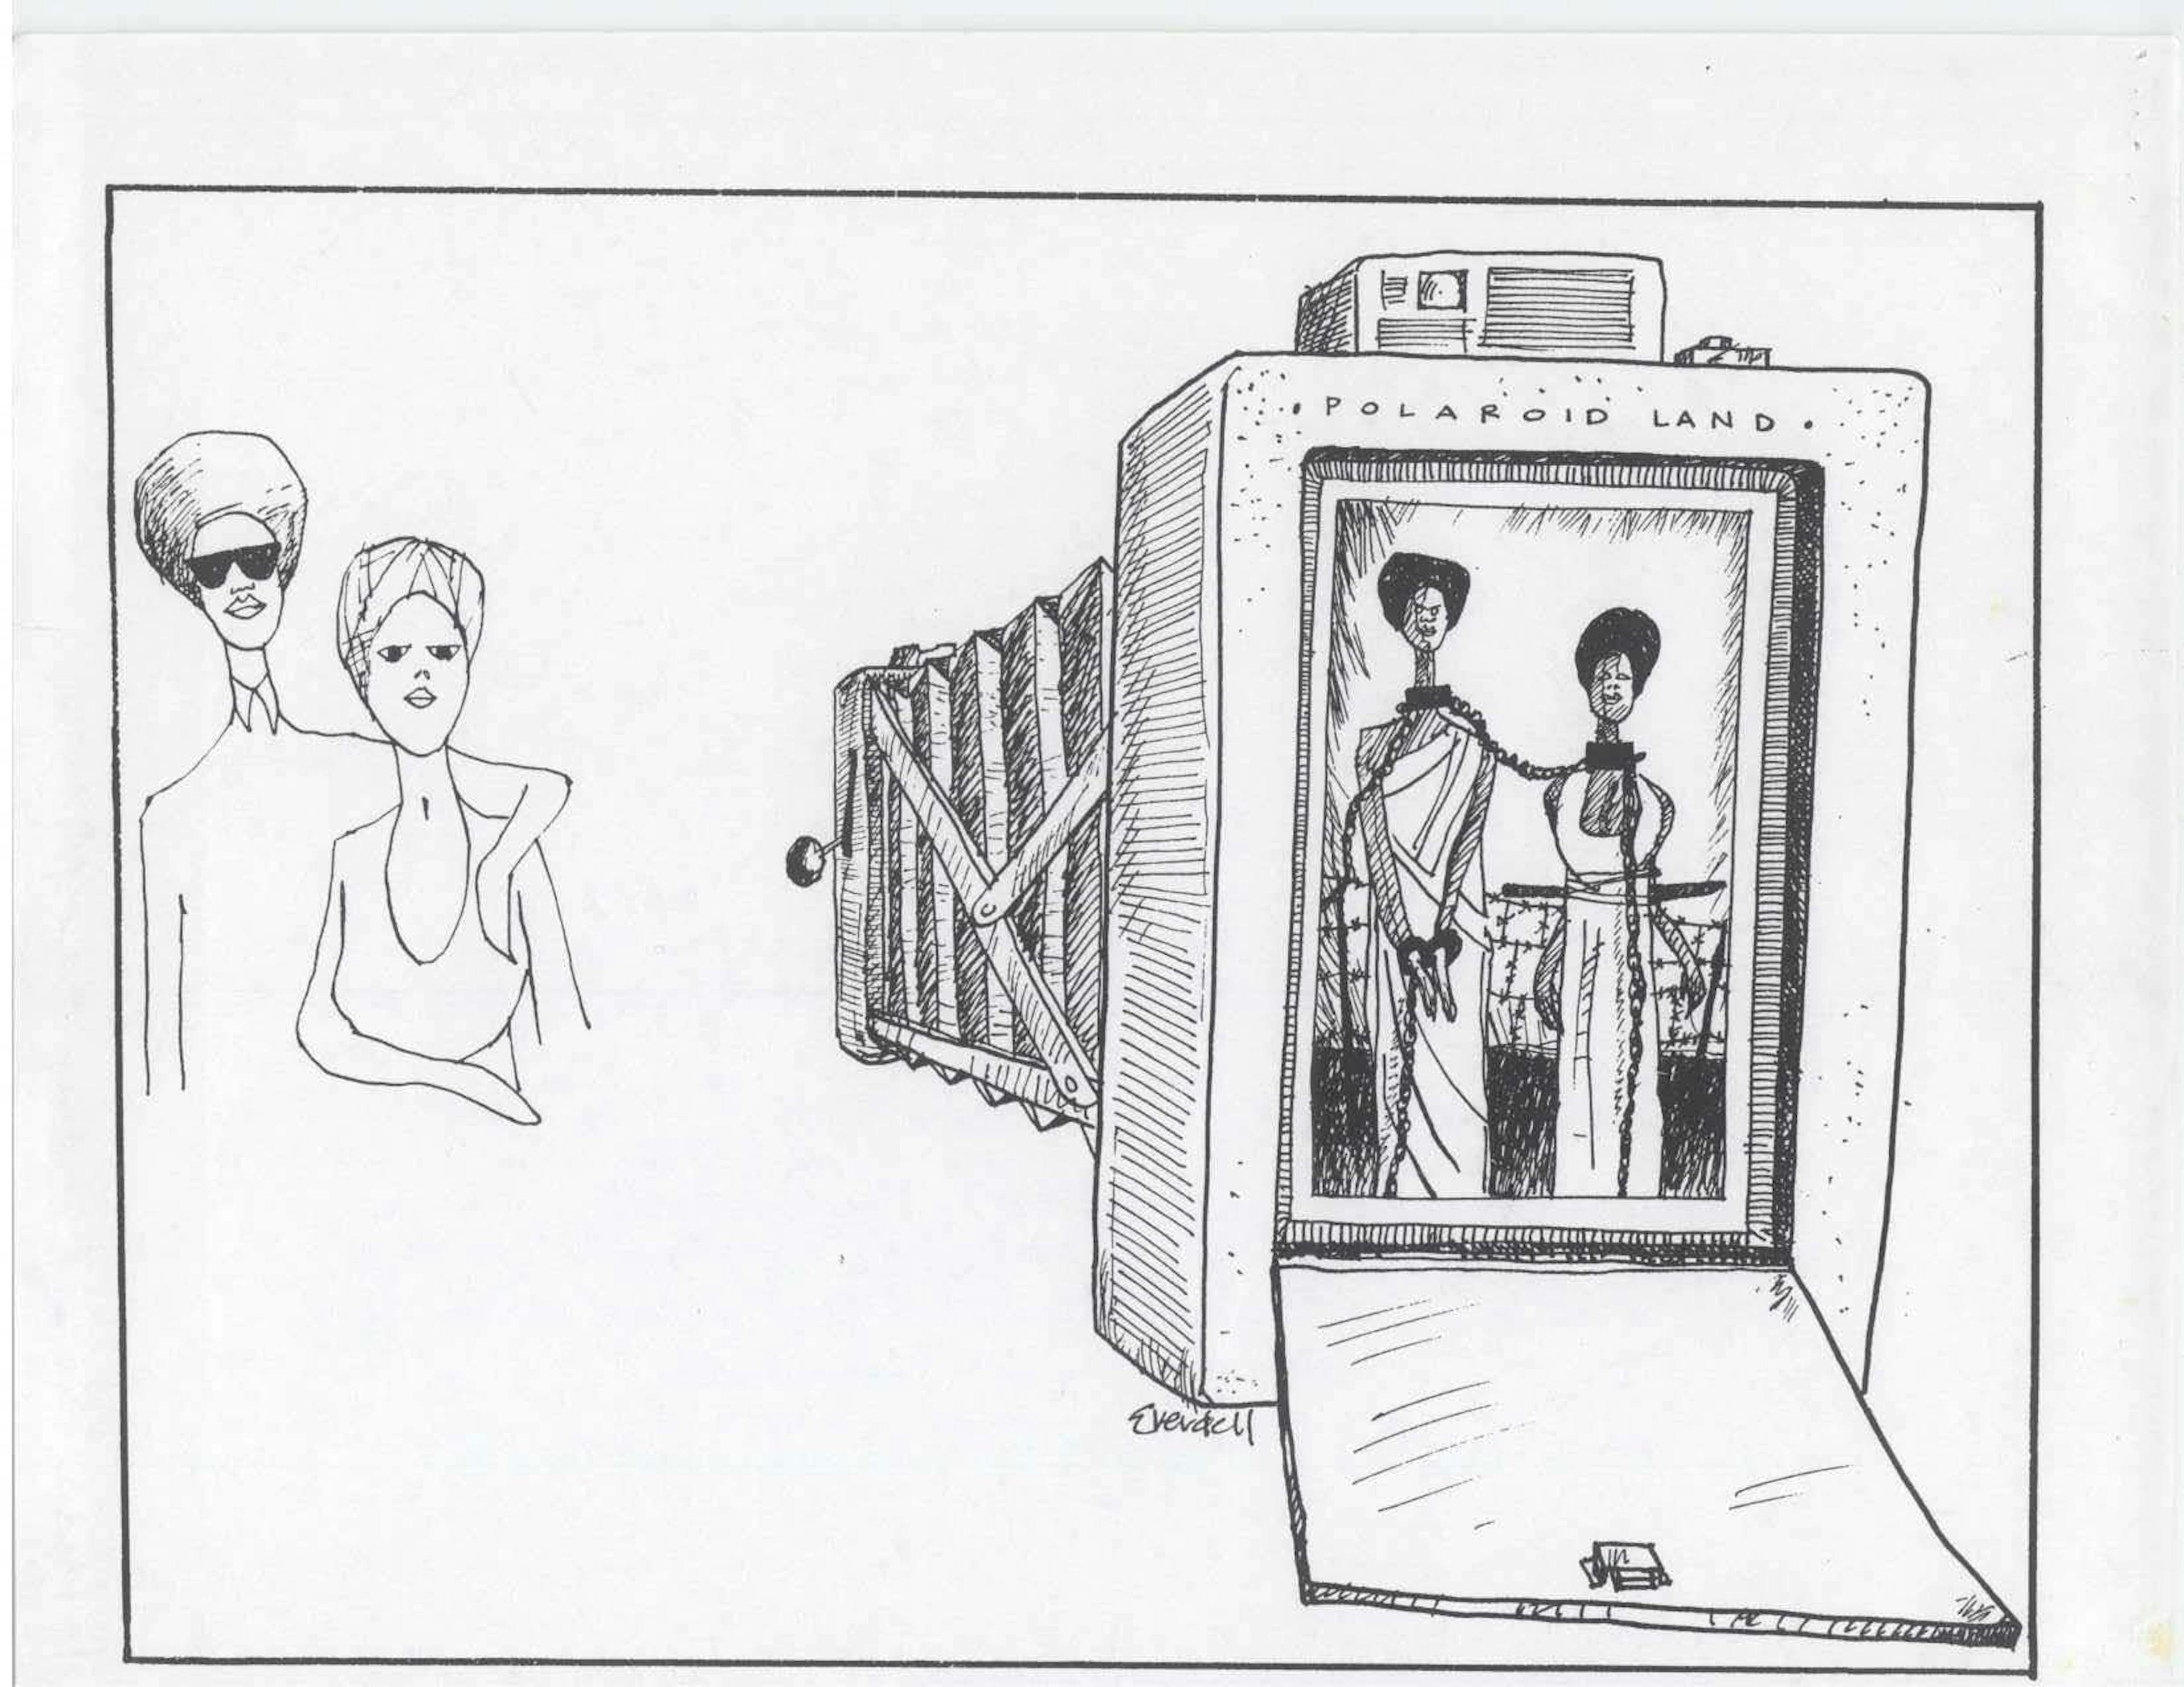 A black-and-white sketch of two people posed in front of a Polaroid camera, with the camera’s film compartment featuring seemingly the same people chained together